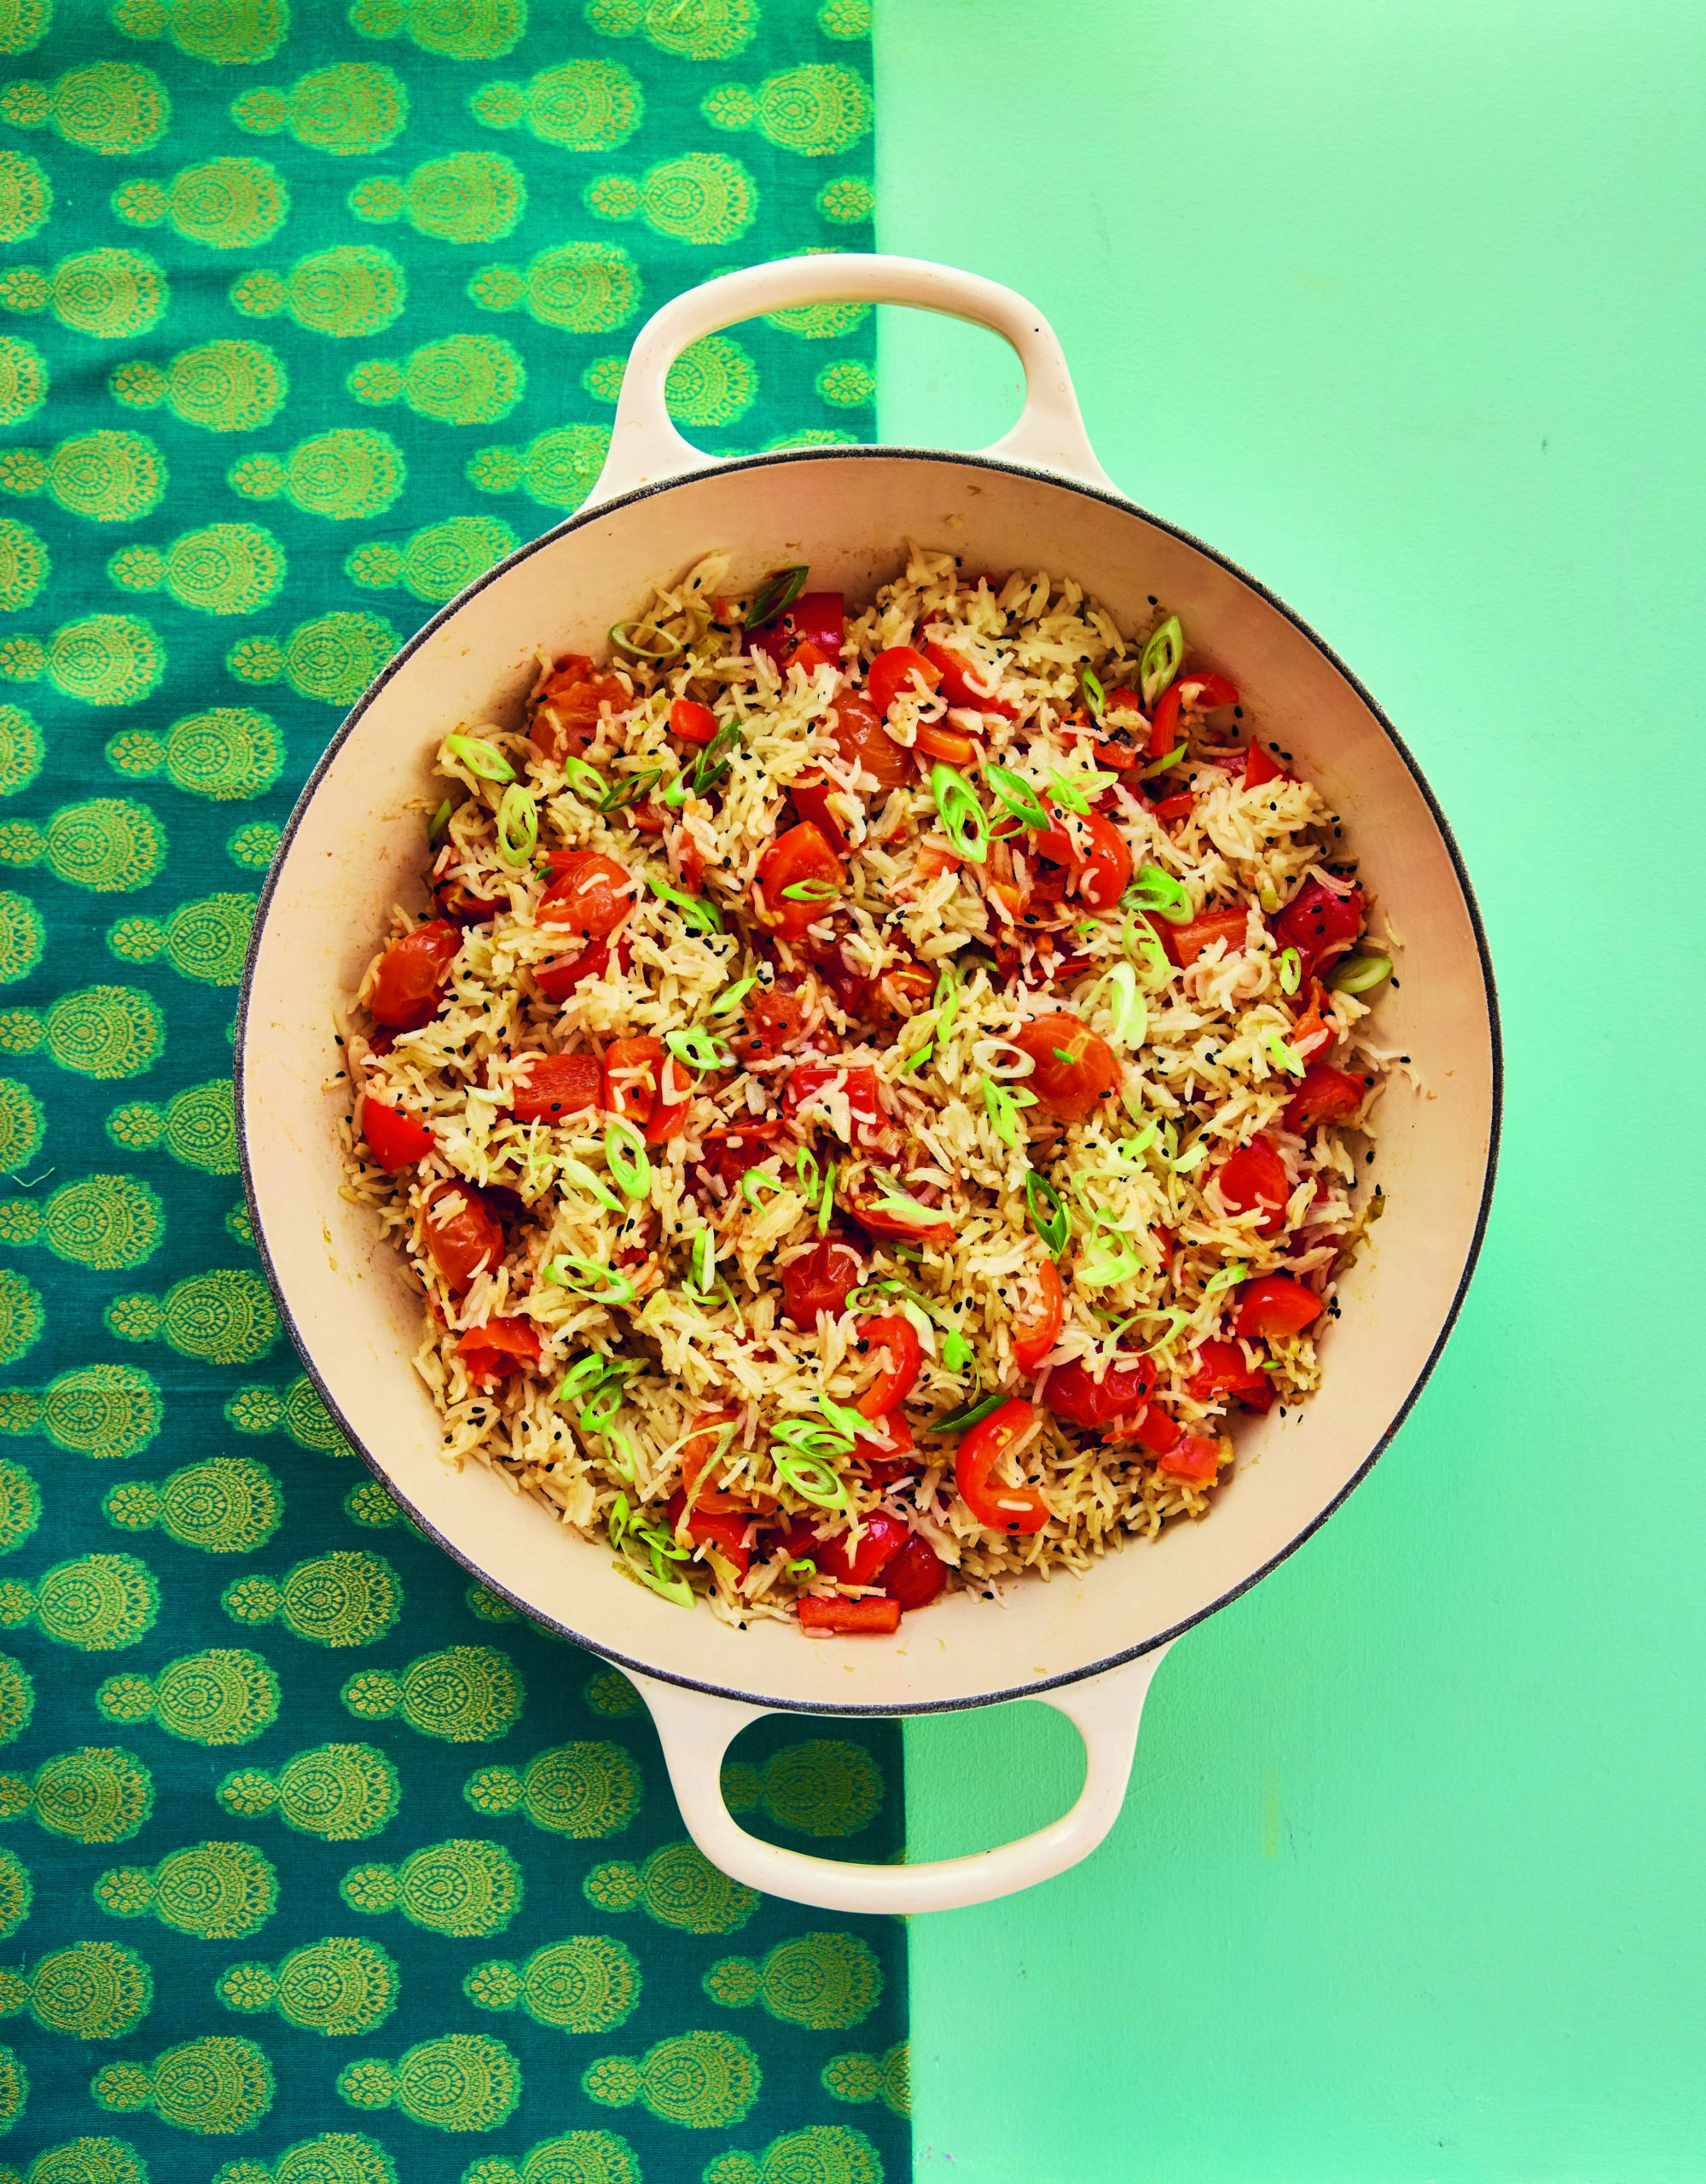 Mum’s All-In-One Spiced Tomato Rice